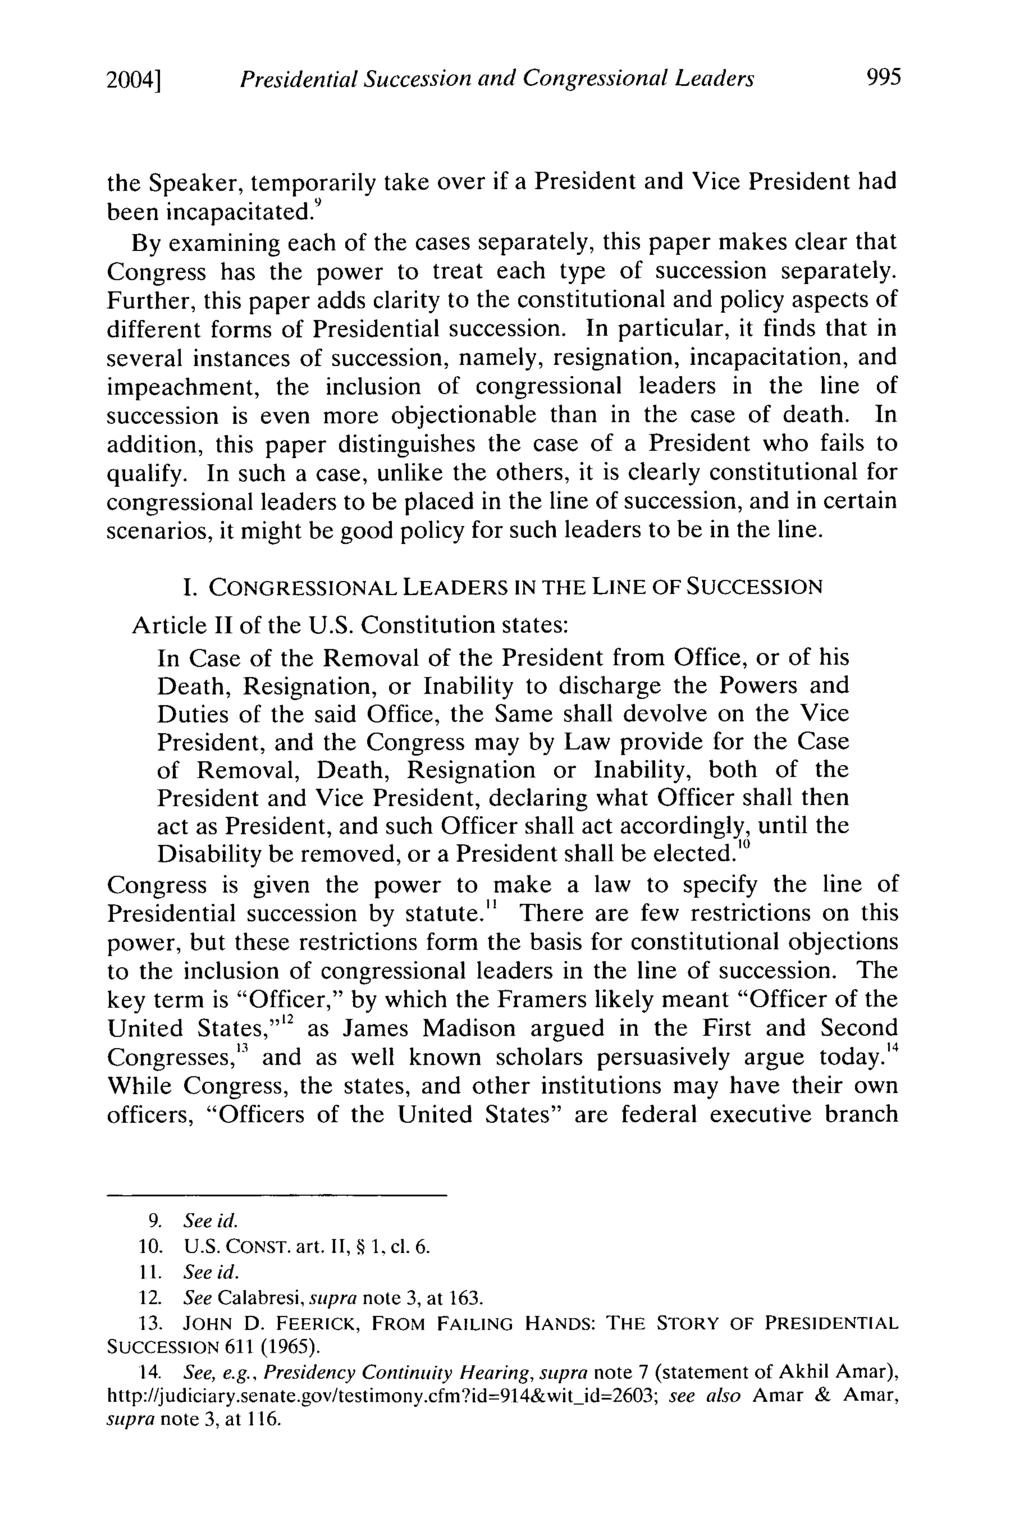 2004] Presidential Succession and Congressional Leaders the Speaker, temporarily take over if a President and Vice President had been incapacitated.